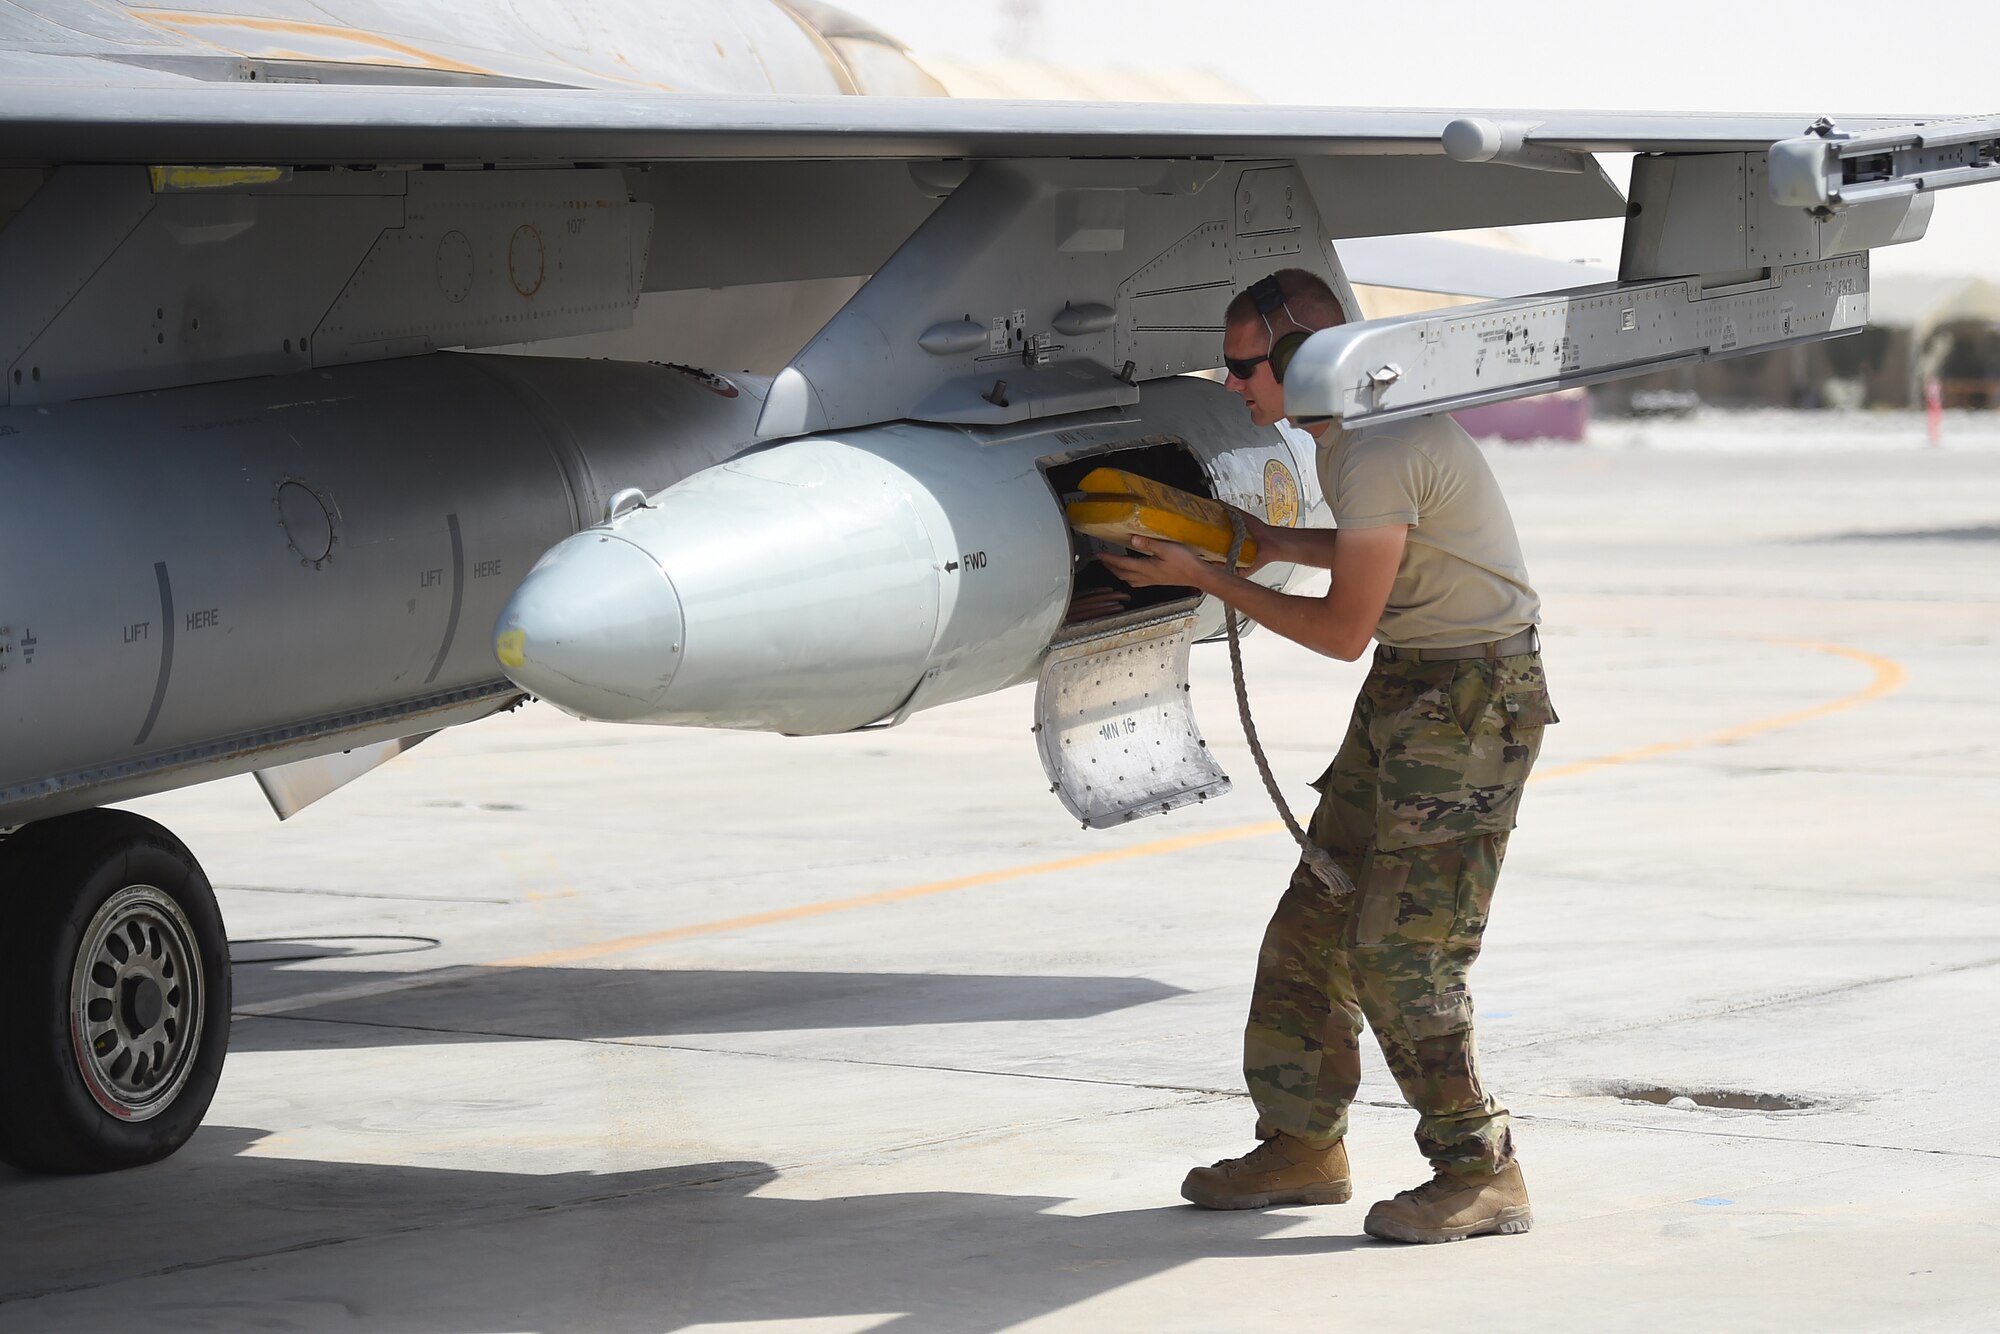 An Airman puts wood blocks into a travel pod of an F-16 fighter jet